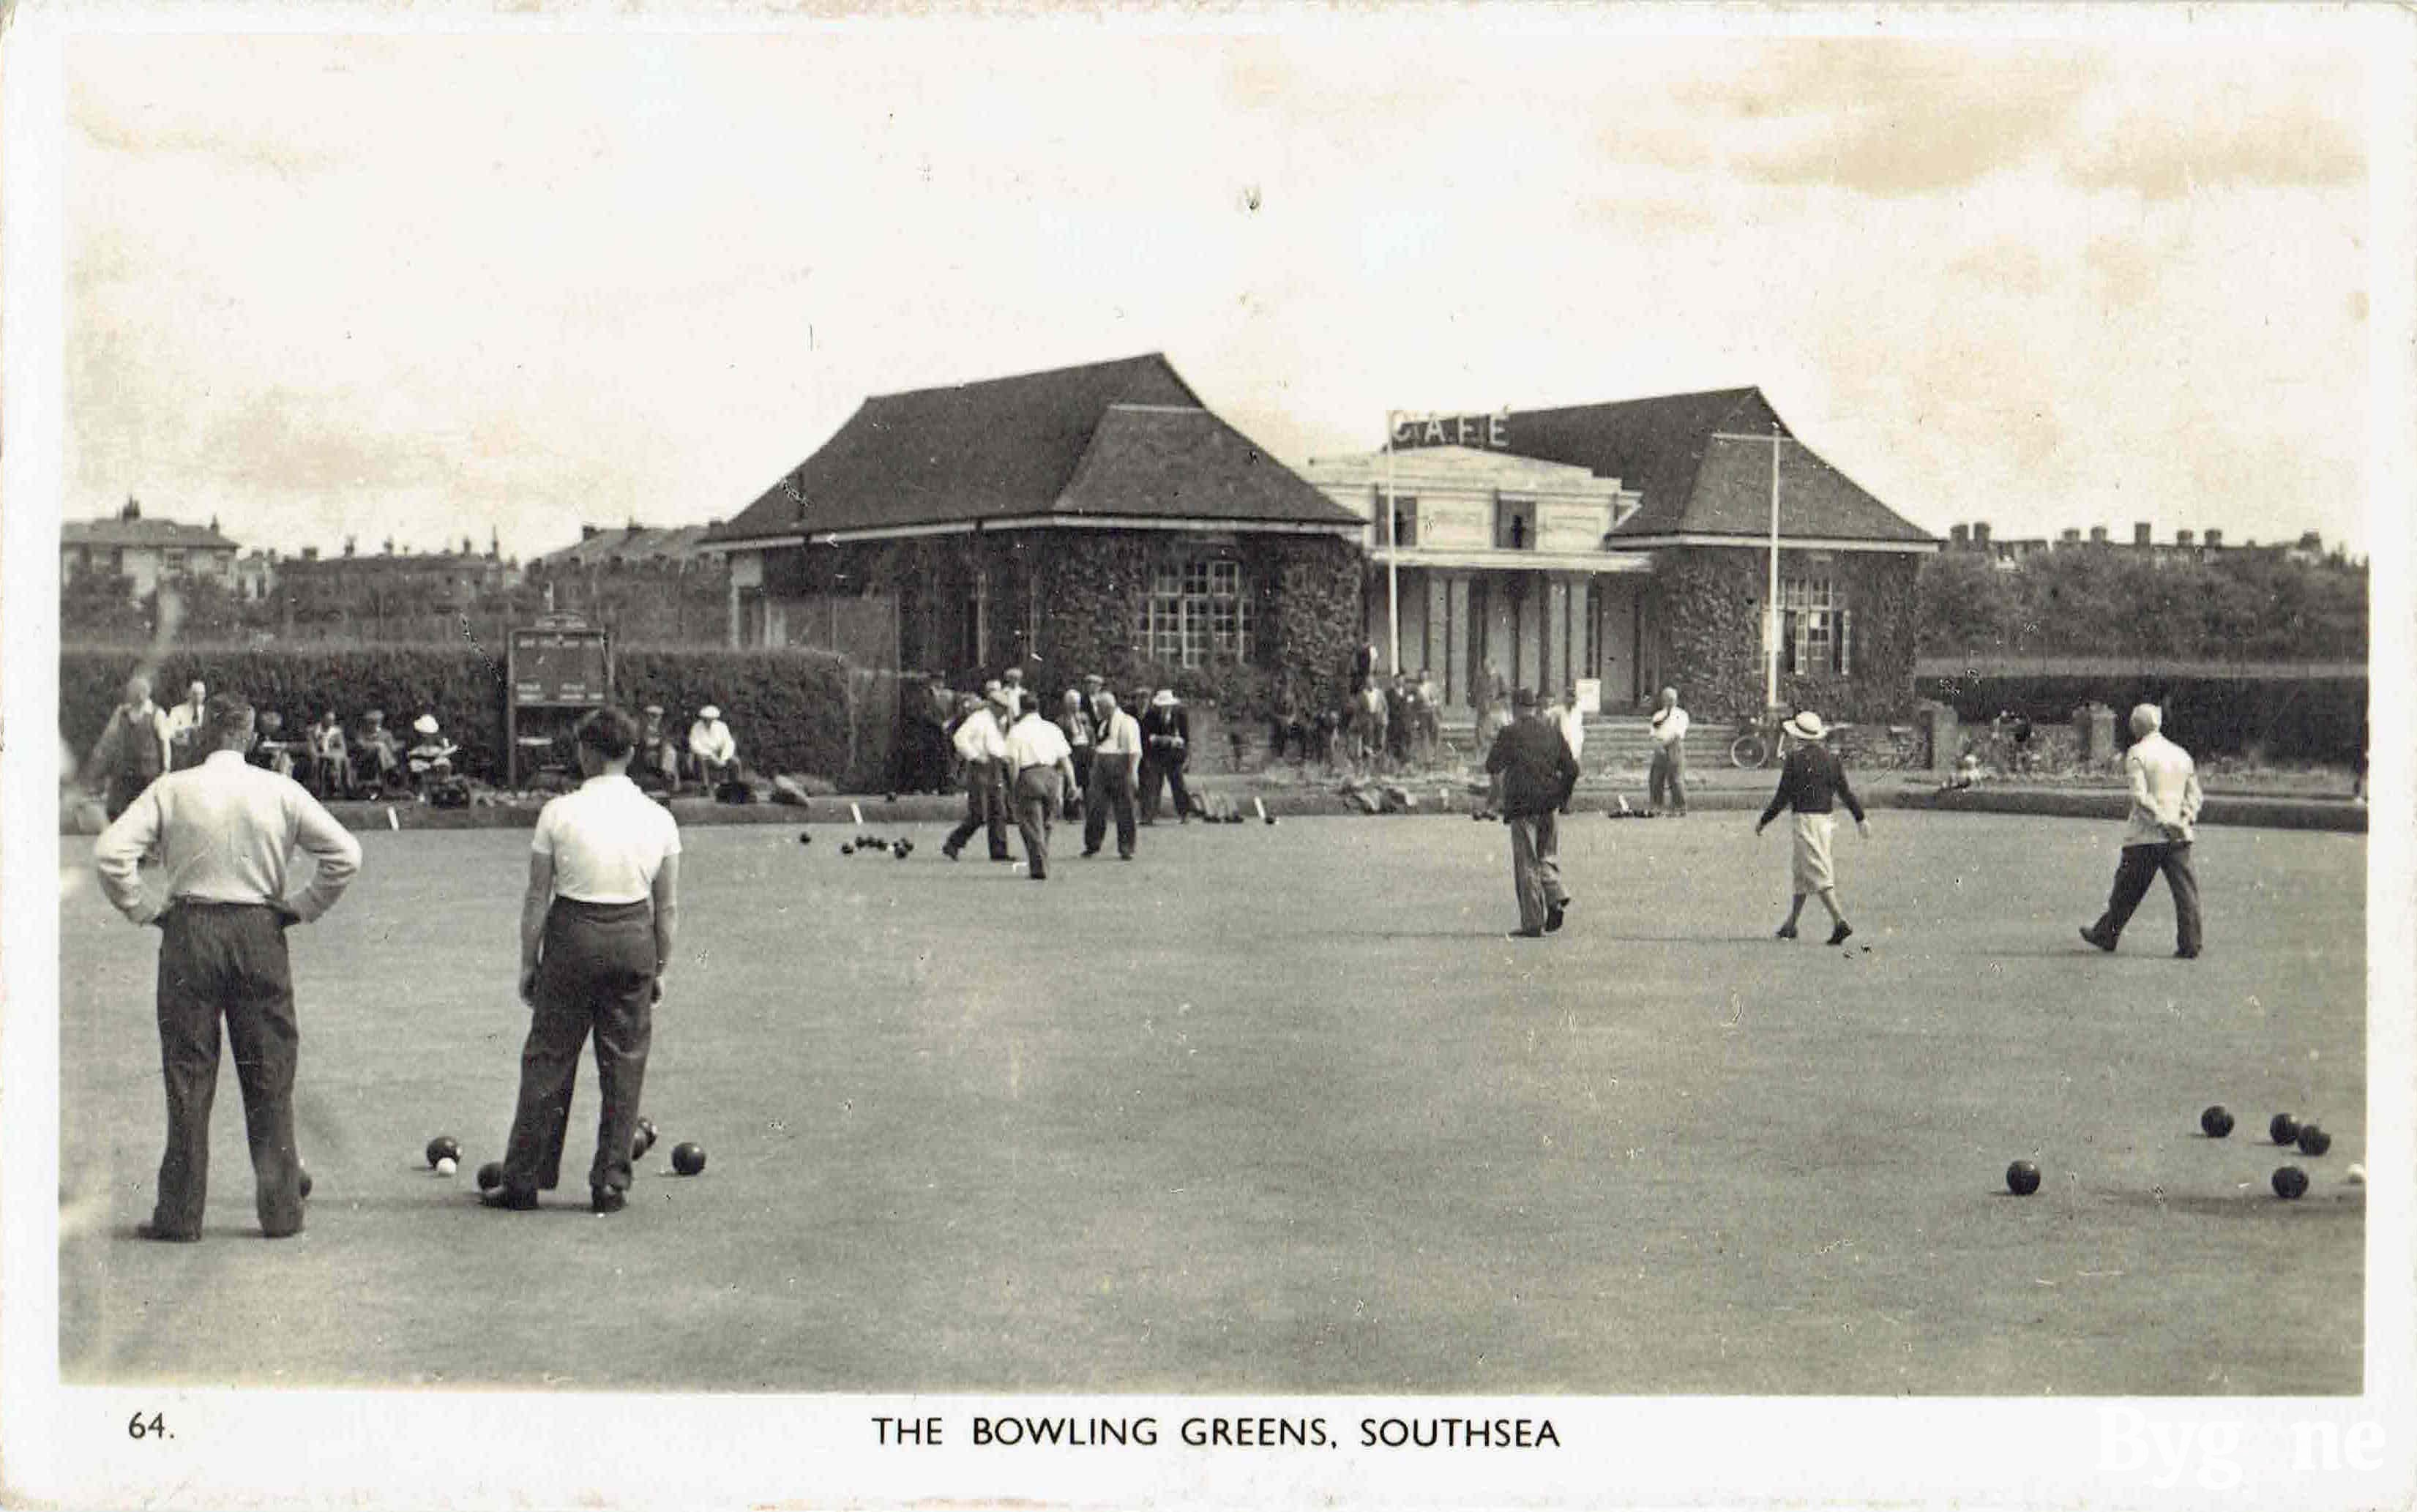 The Bowling Greens, Southsea